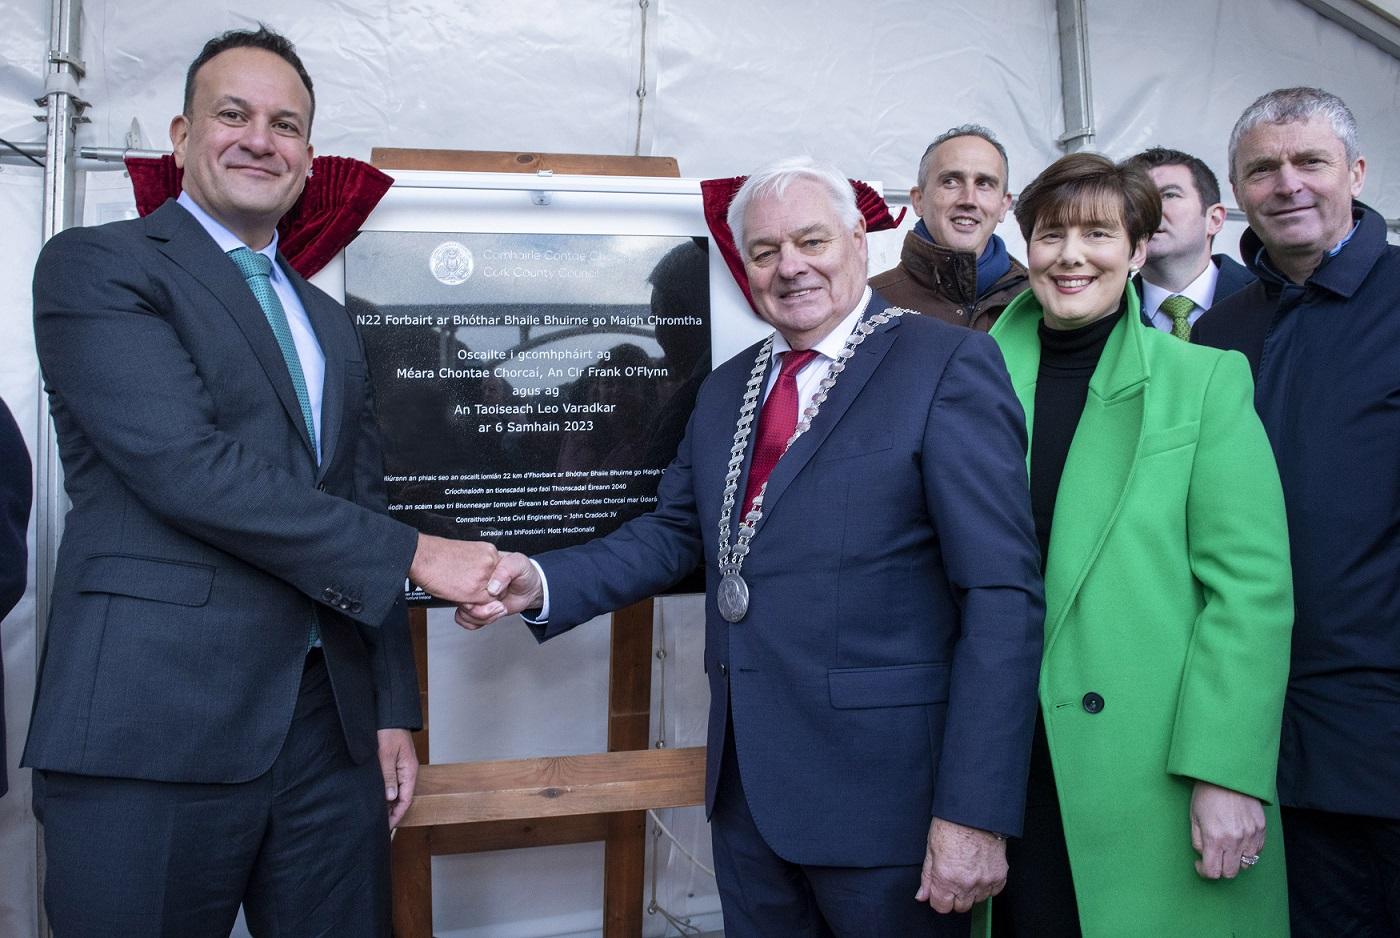 The final section of the N22 Macroom to Baile Bhuirne bypass has been officially opened marking the completion of the €280 million project. The ribbon was cut on the last 6 km section today by Mayor of the County of Cork, Cllr. Frank O’Flynn and Taoiseach, Leo Varadkar TD.